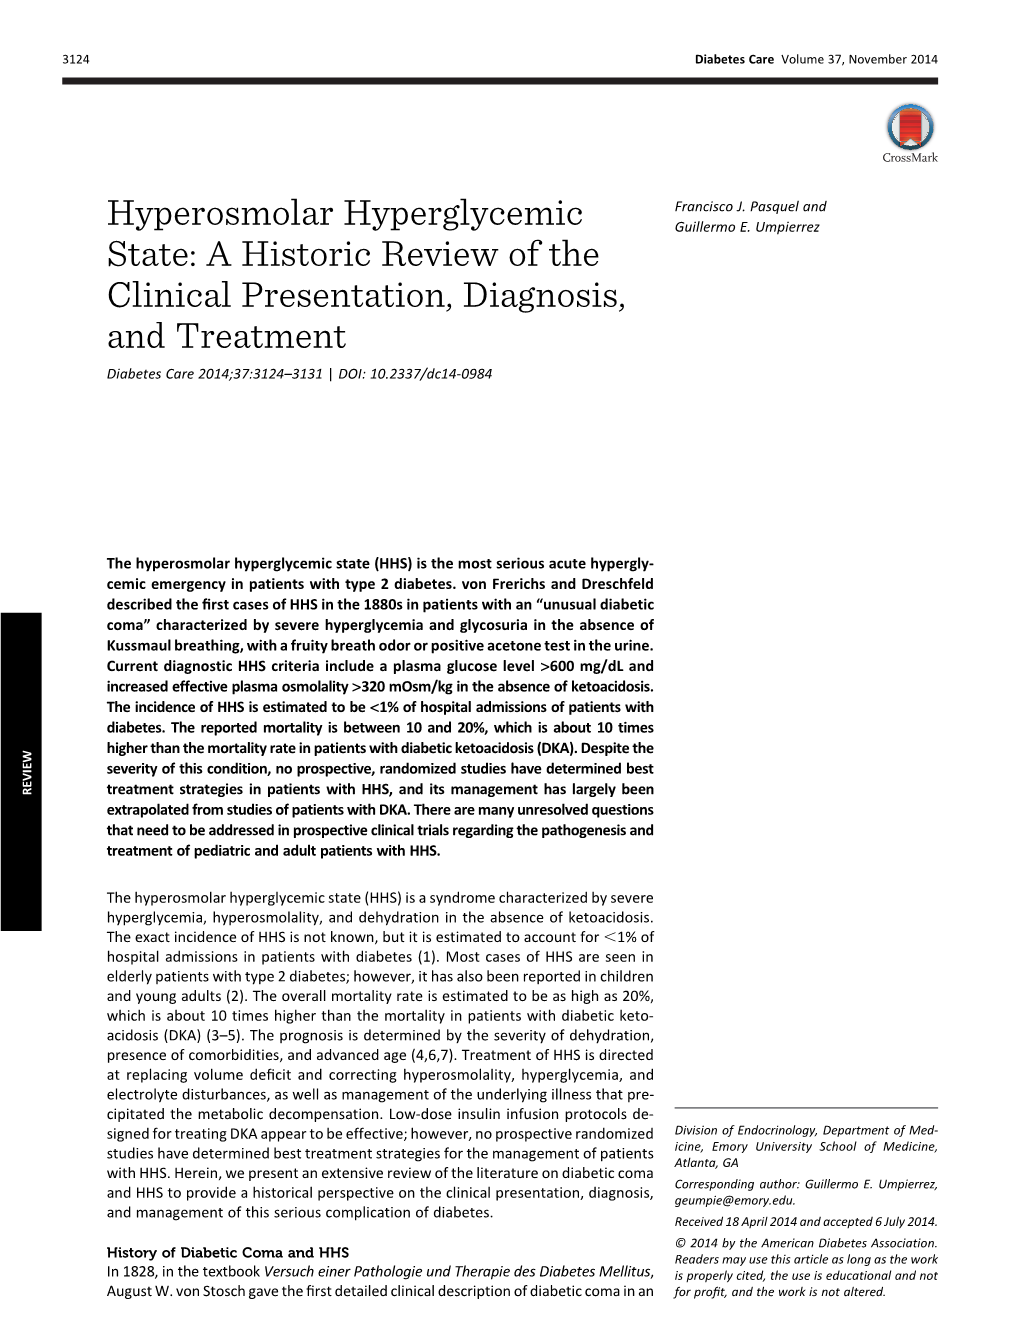 Hyperosmolar Hyperglycemic State (HHS) Is the Most Serious Acute Hypergly- Cemic Emergency in Patients with Type 2 Diabetes